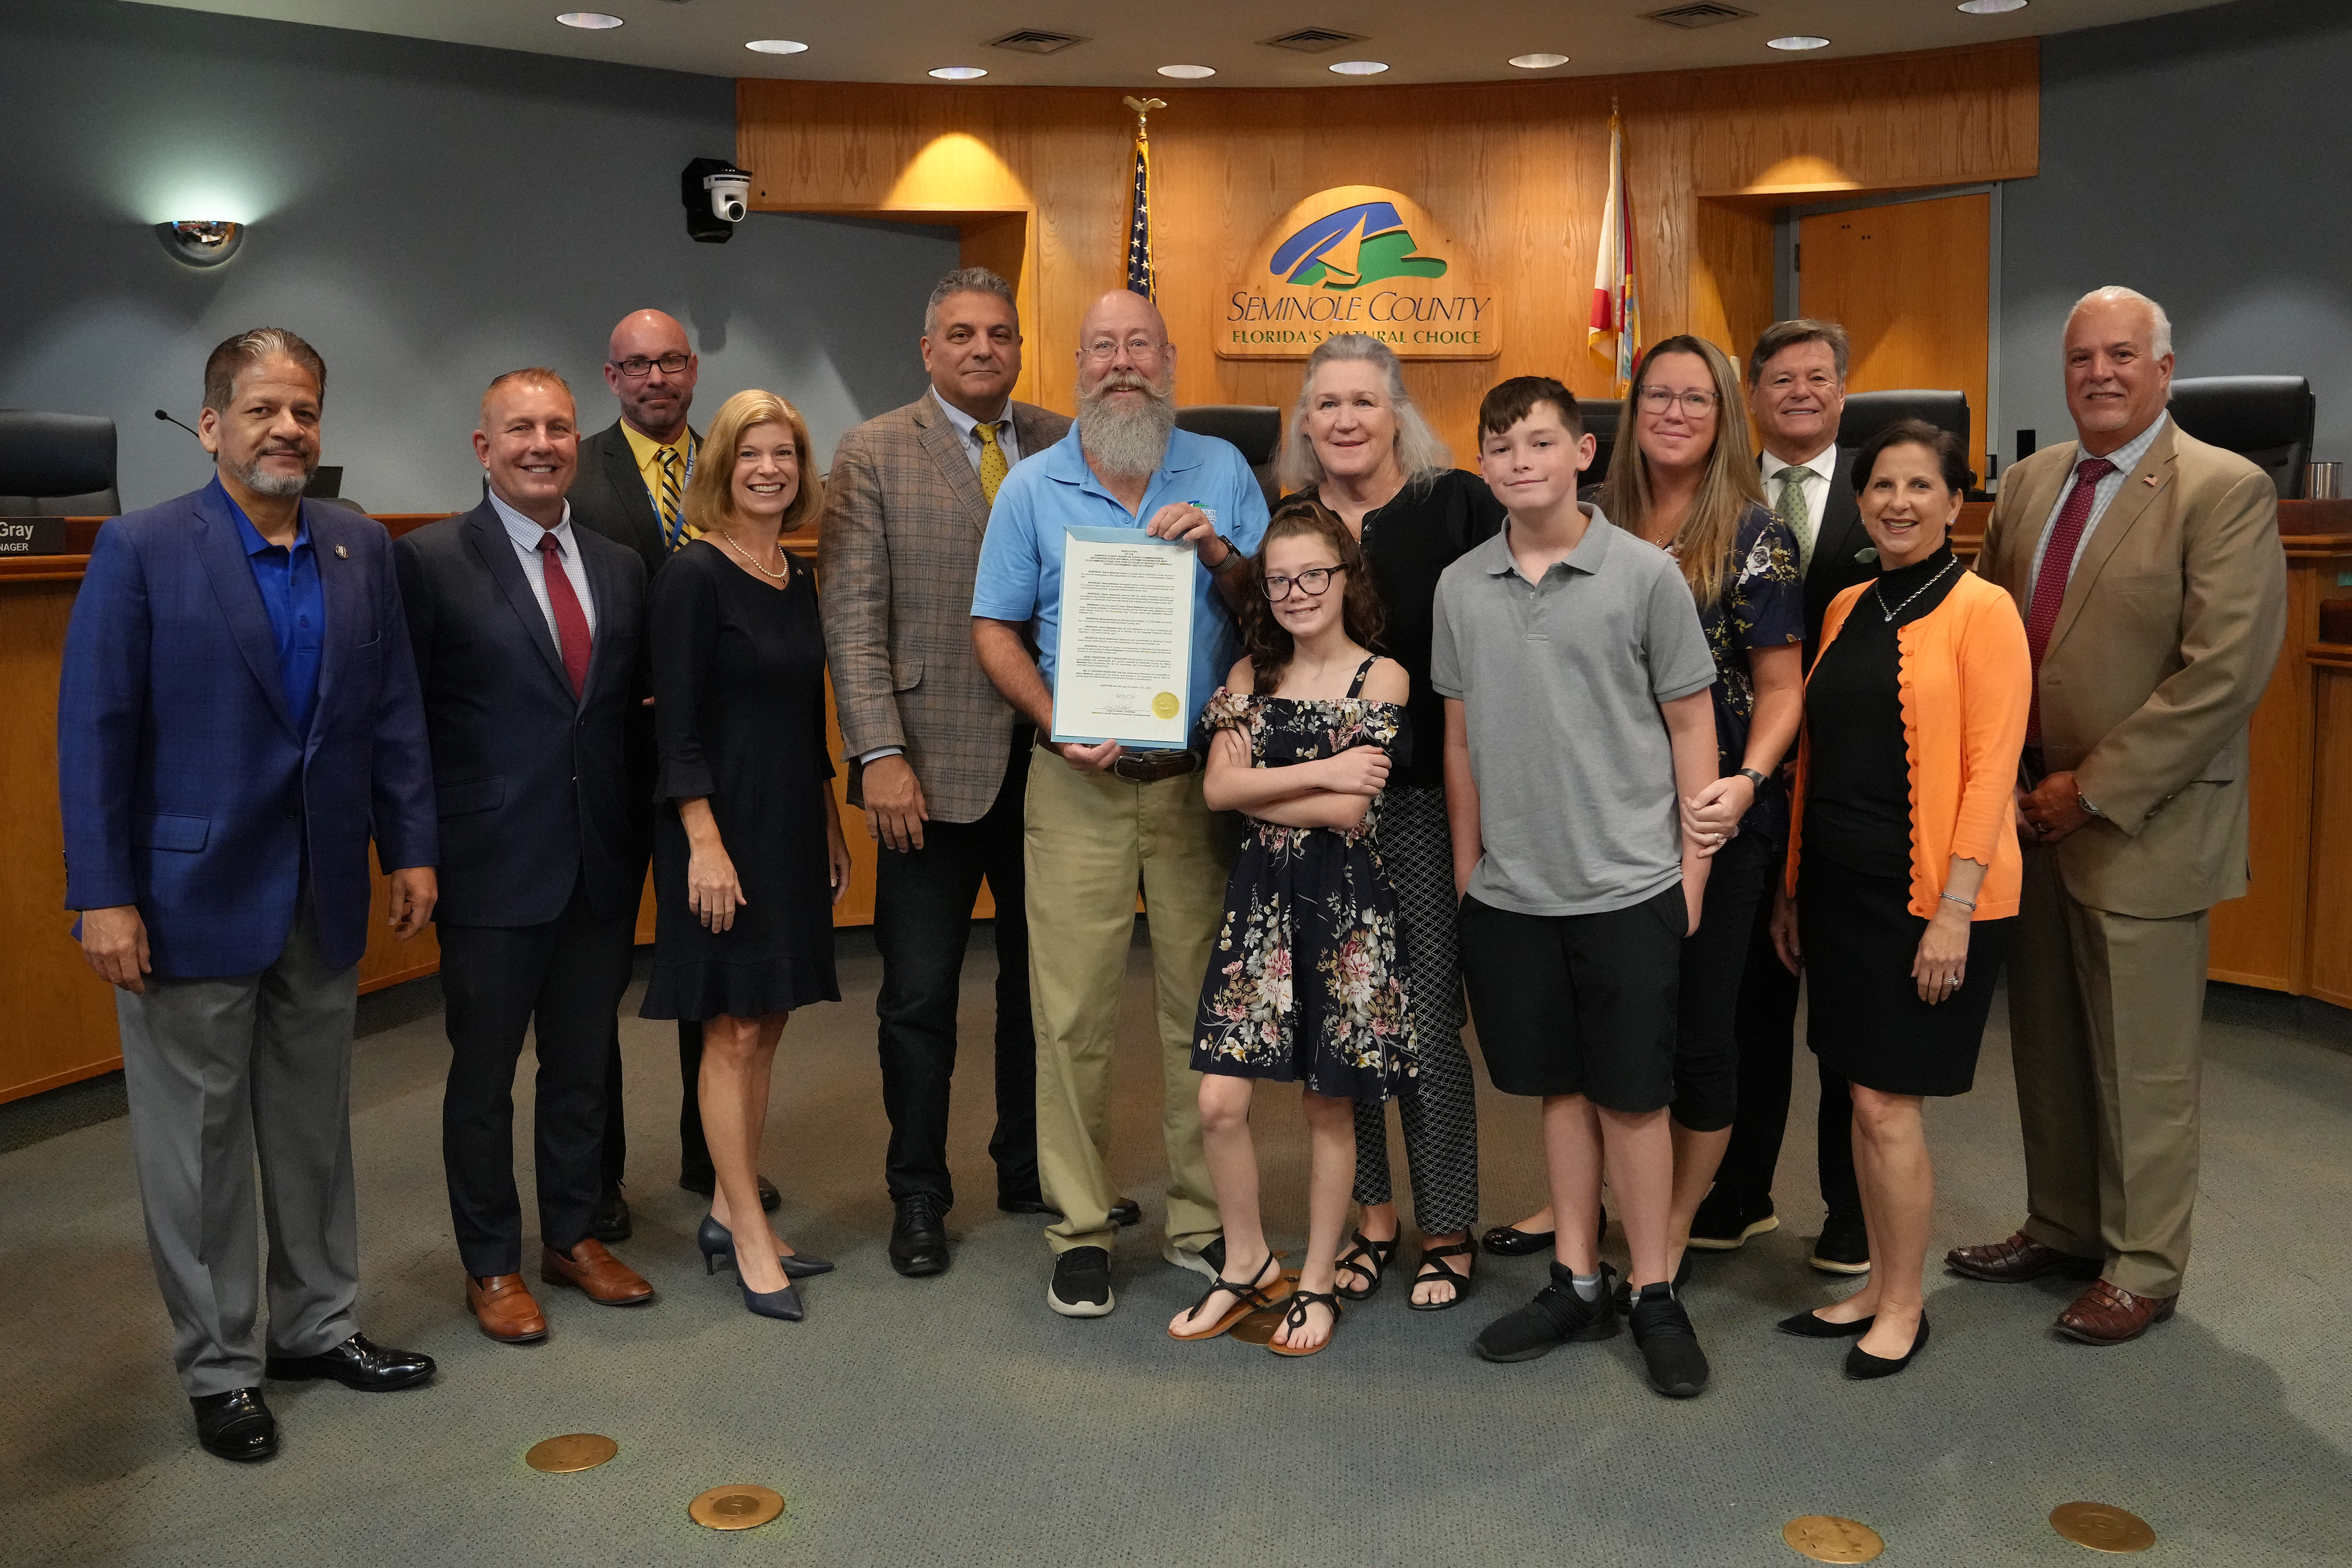 Resolution - Recognizing Steve Bateman, Systems Coordinator, Telecommunications, for 35 years of service to Seminole County Government and its citizens. (Steve Bateman, Systems Coordinator)